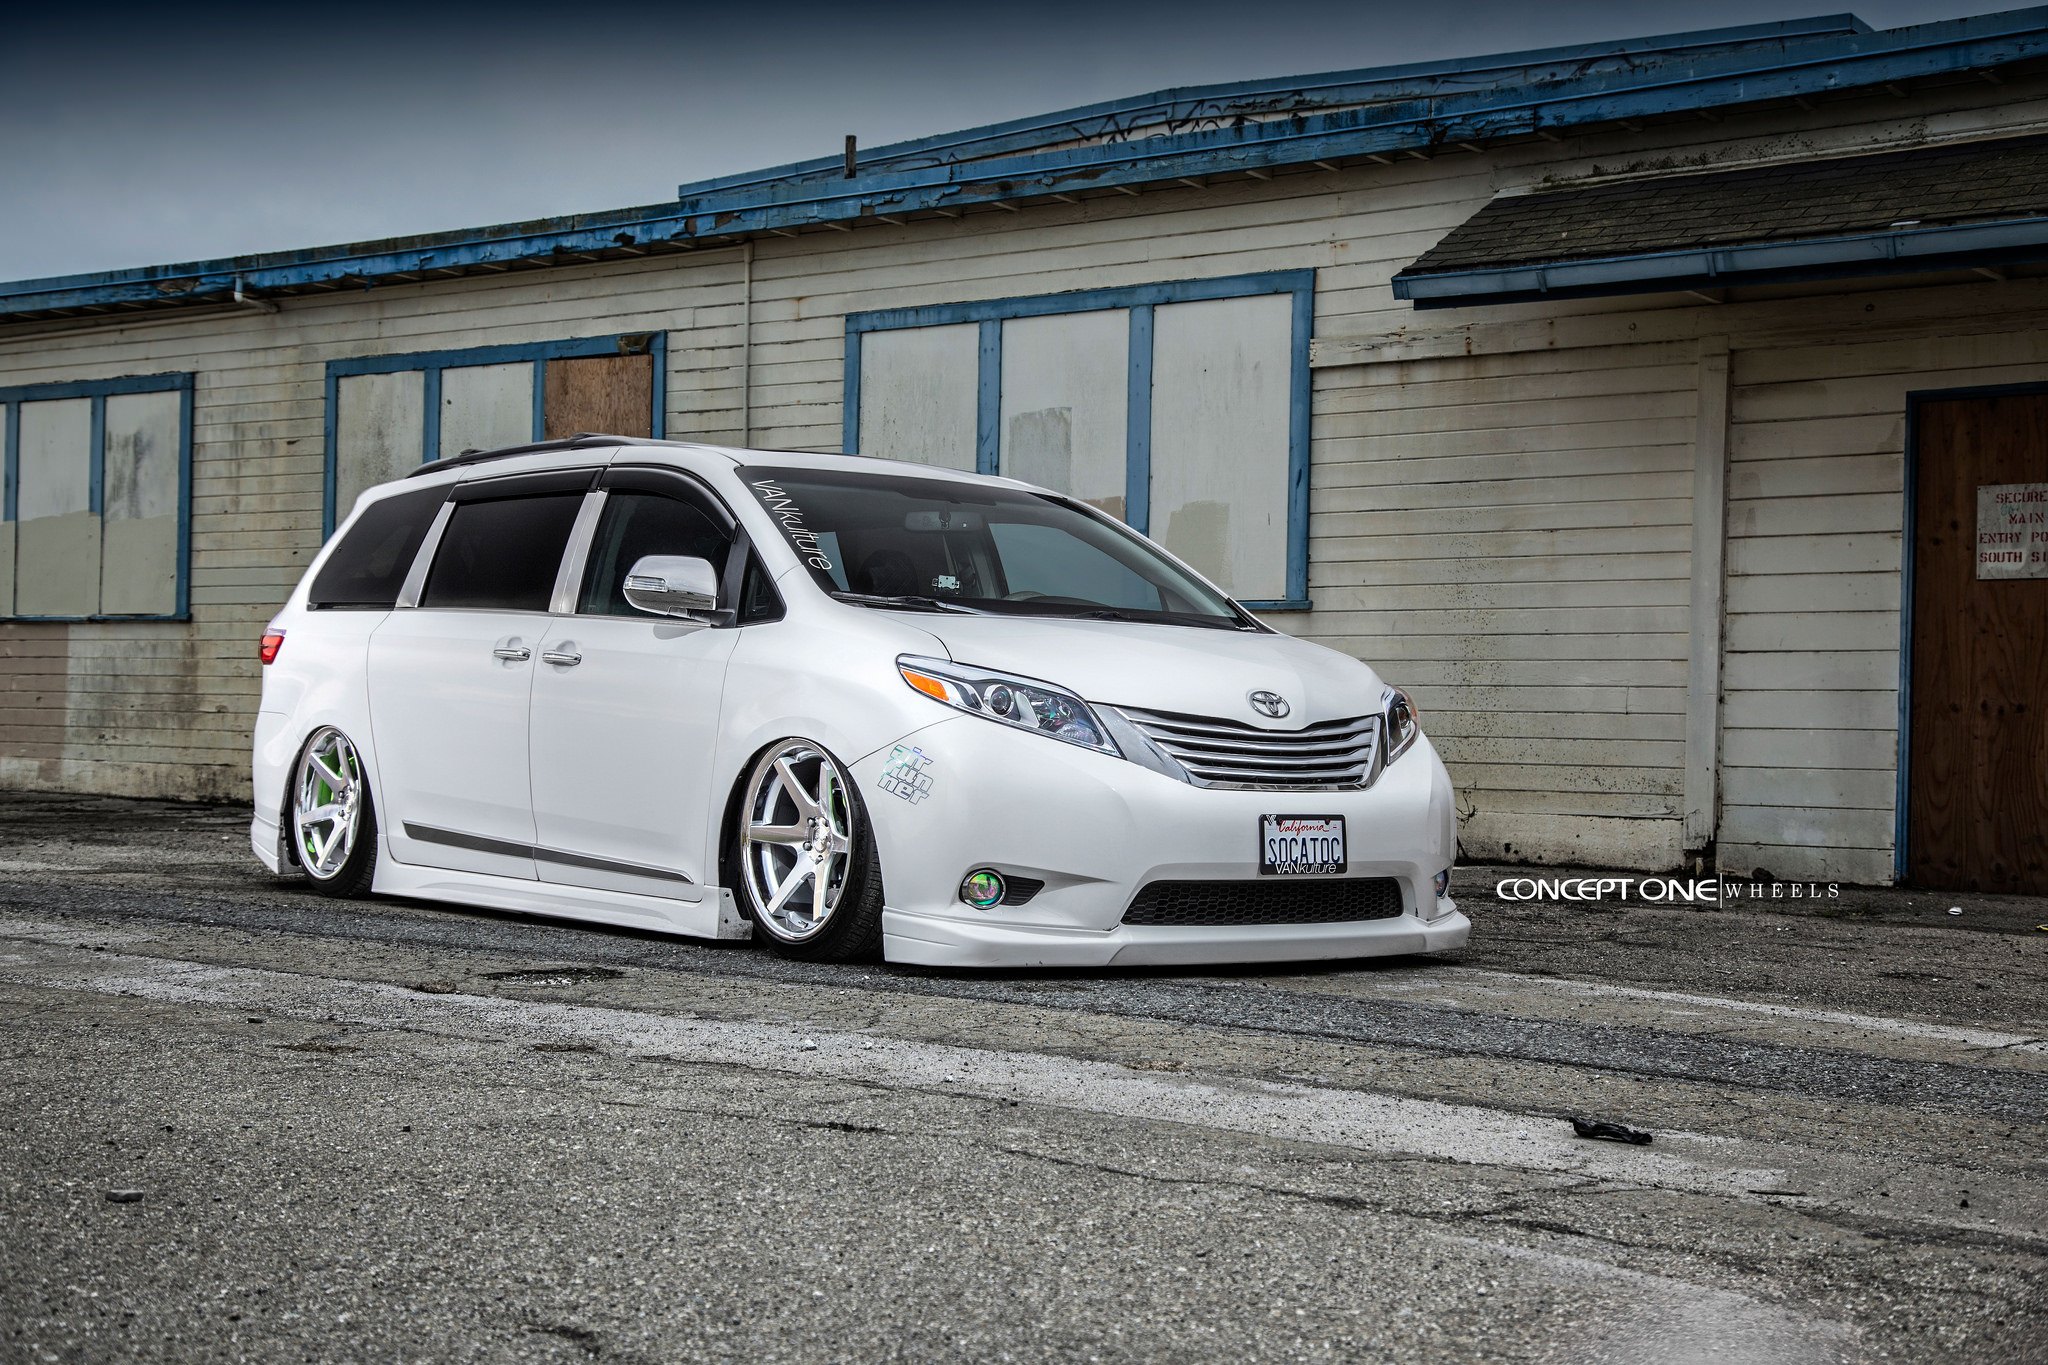 Custom Lowered White Toyota Sienna - Photo by Concept One